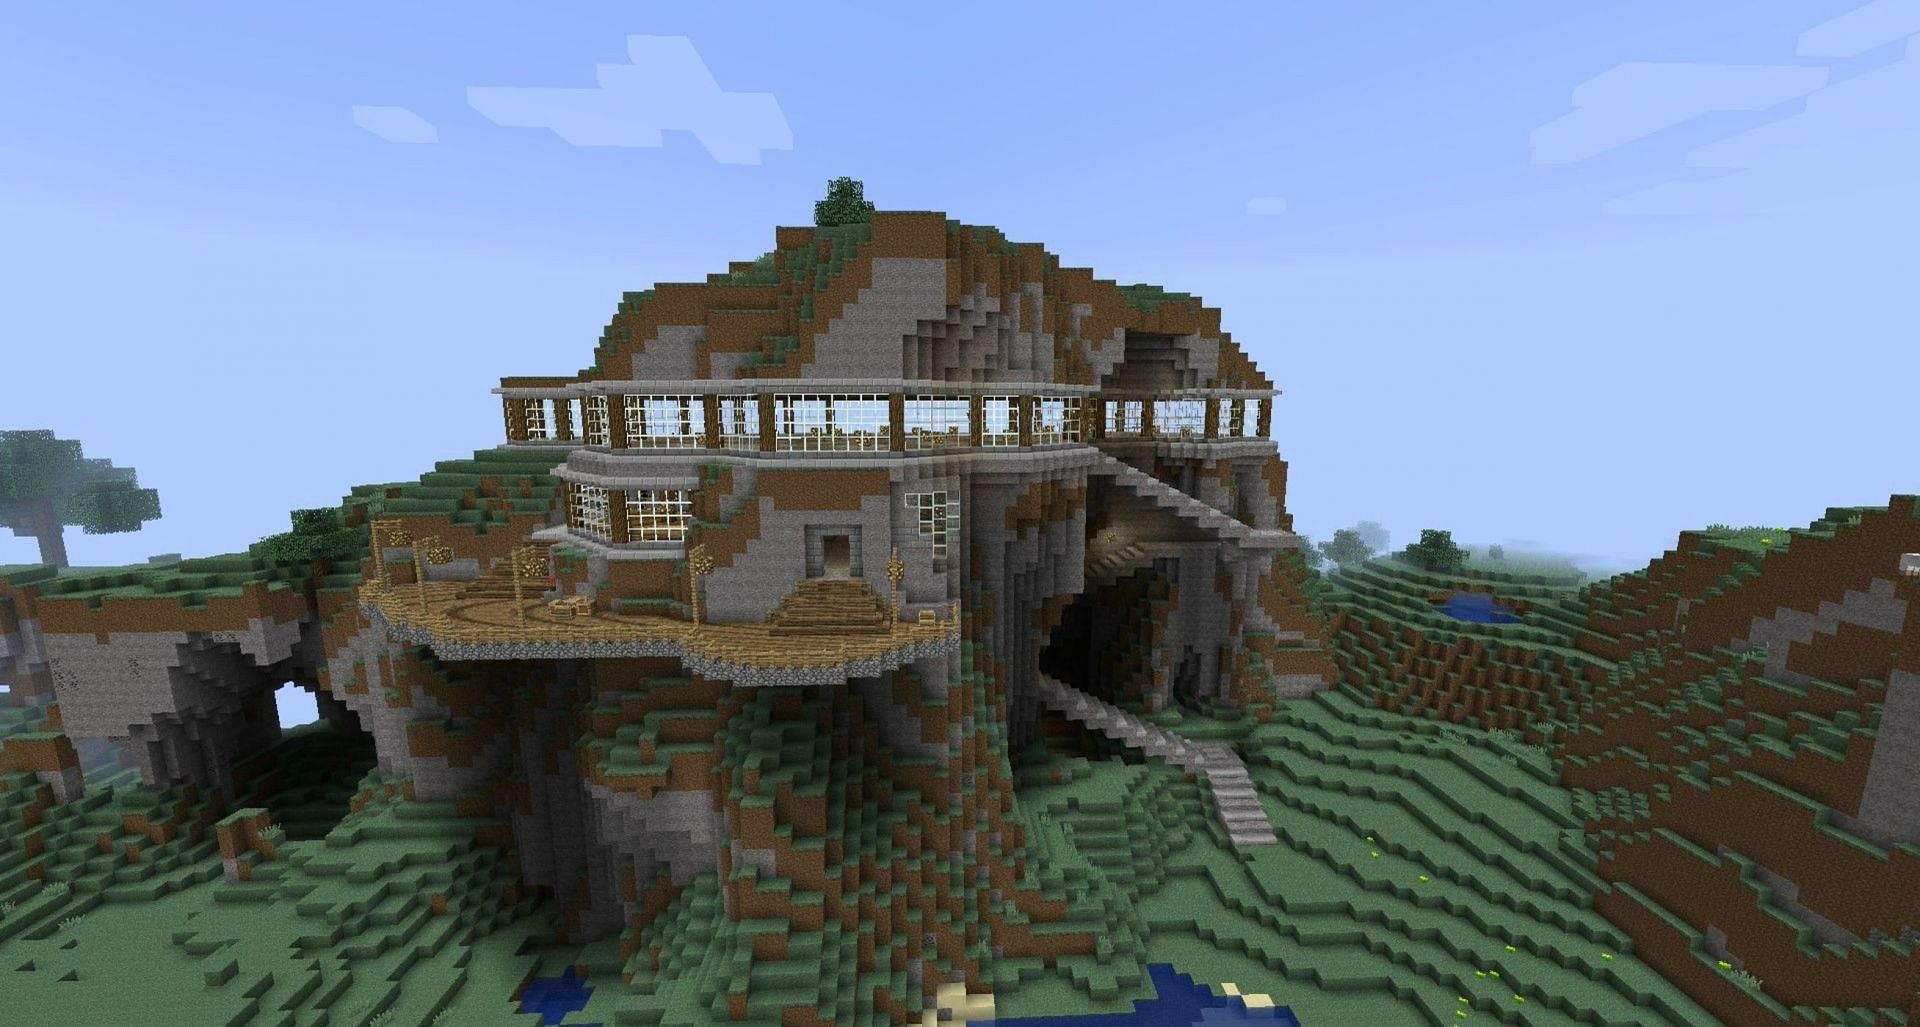 House in the mountain. #minecraft #minecraftbuilding #minecrafttuto, mountain house minecraft